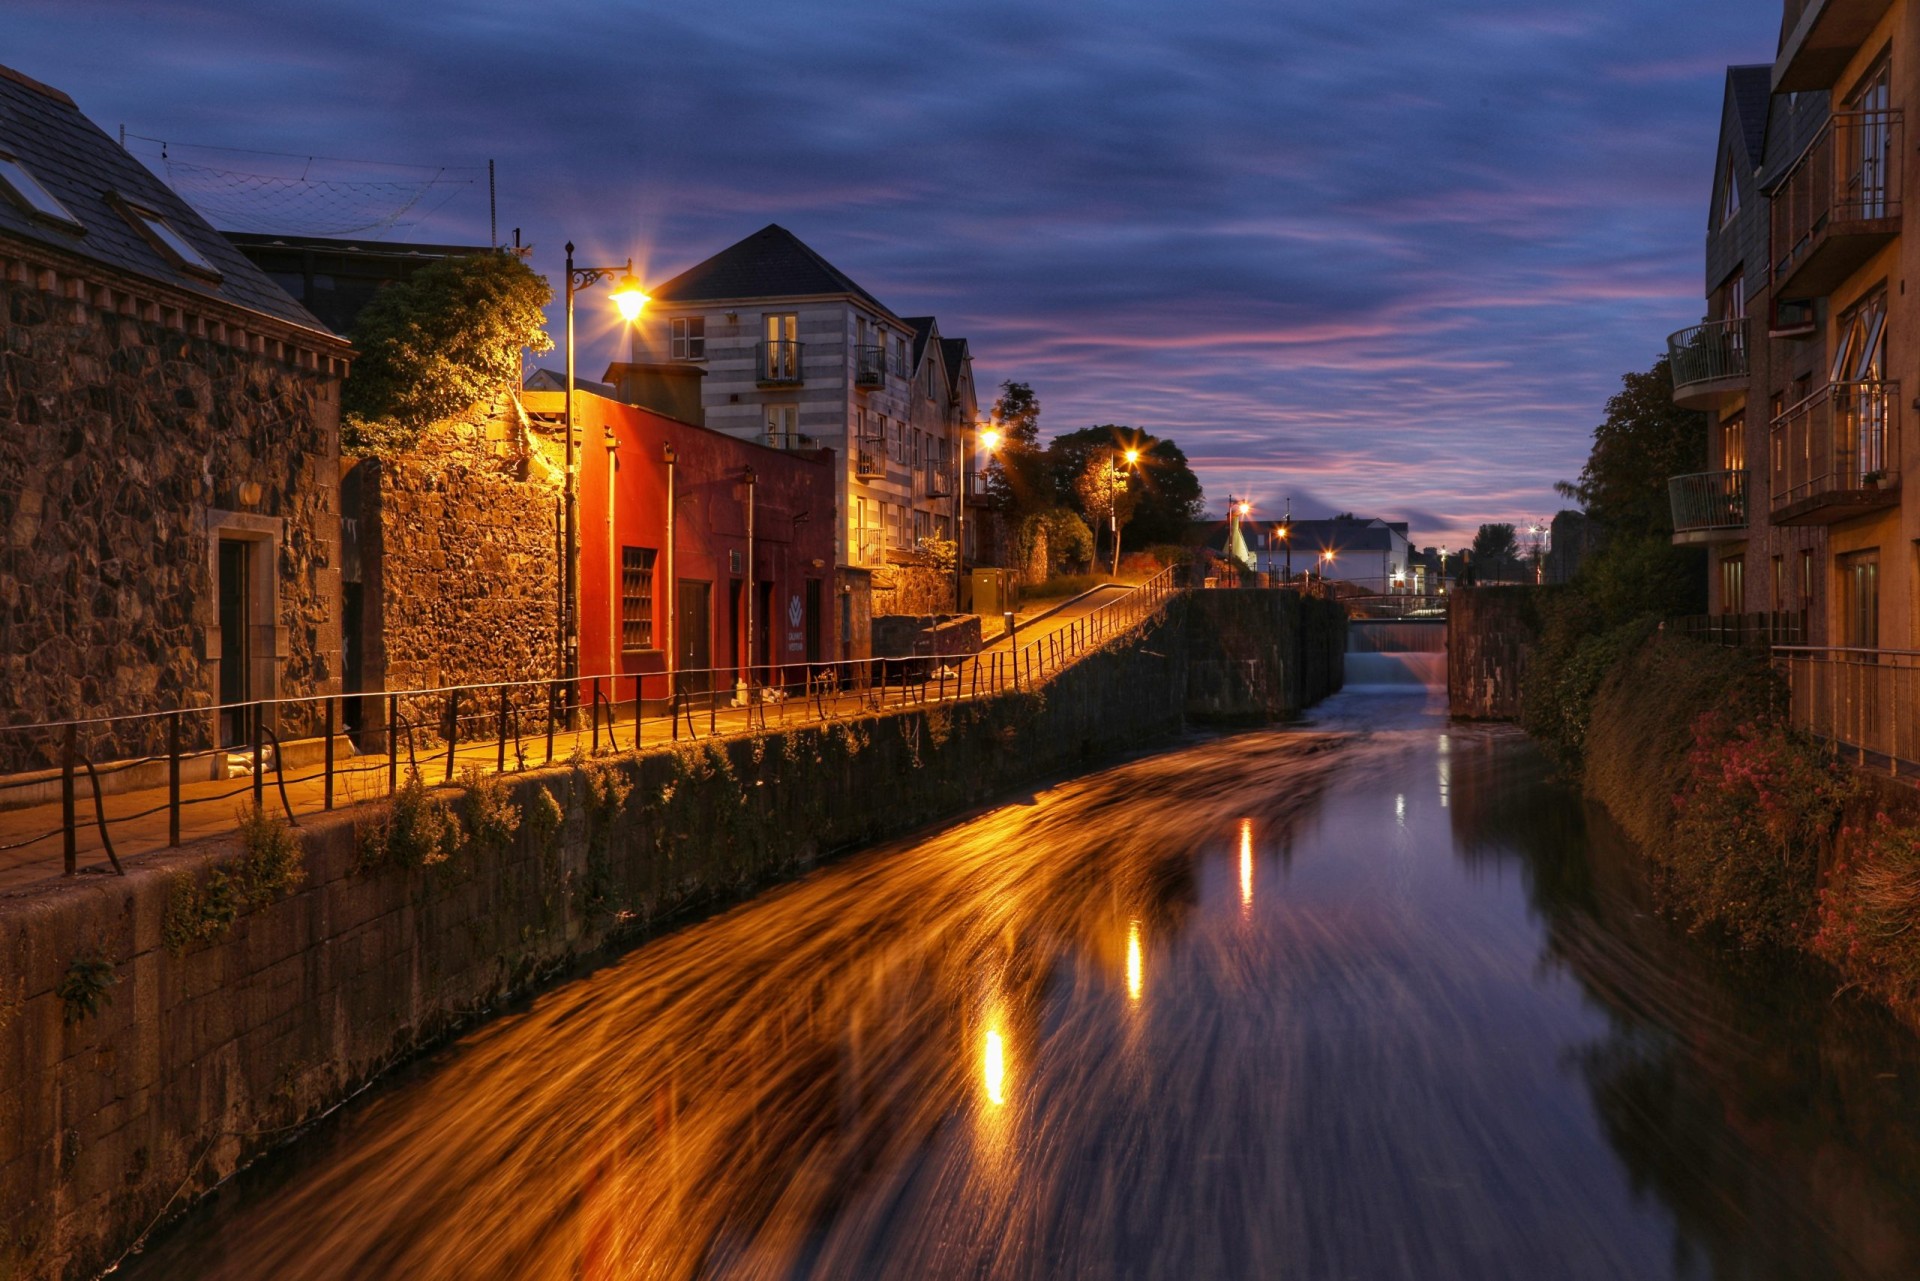 Connected Hubs encourages digital champions and towns to enter The .IE Digital Towns Awards 2022 